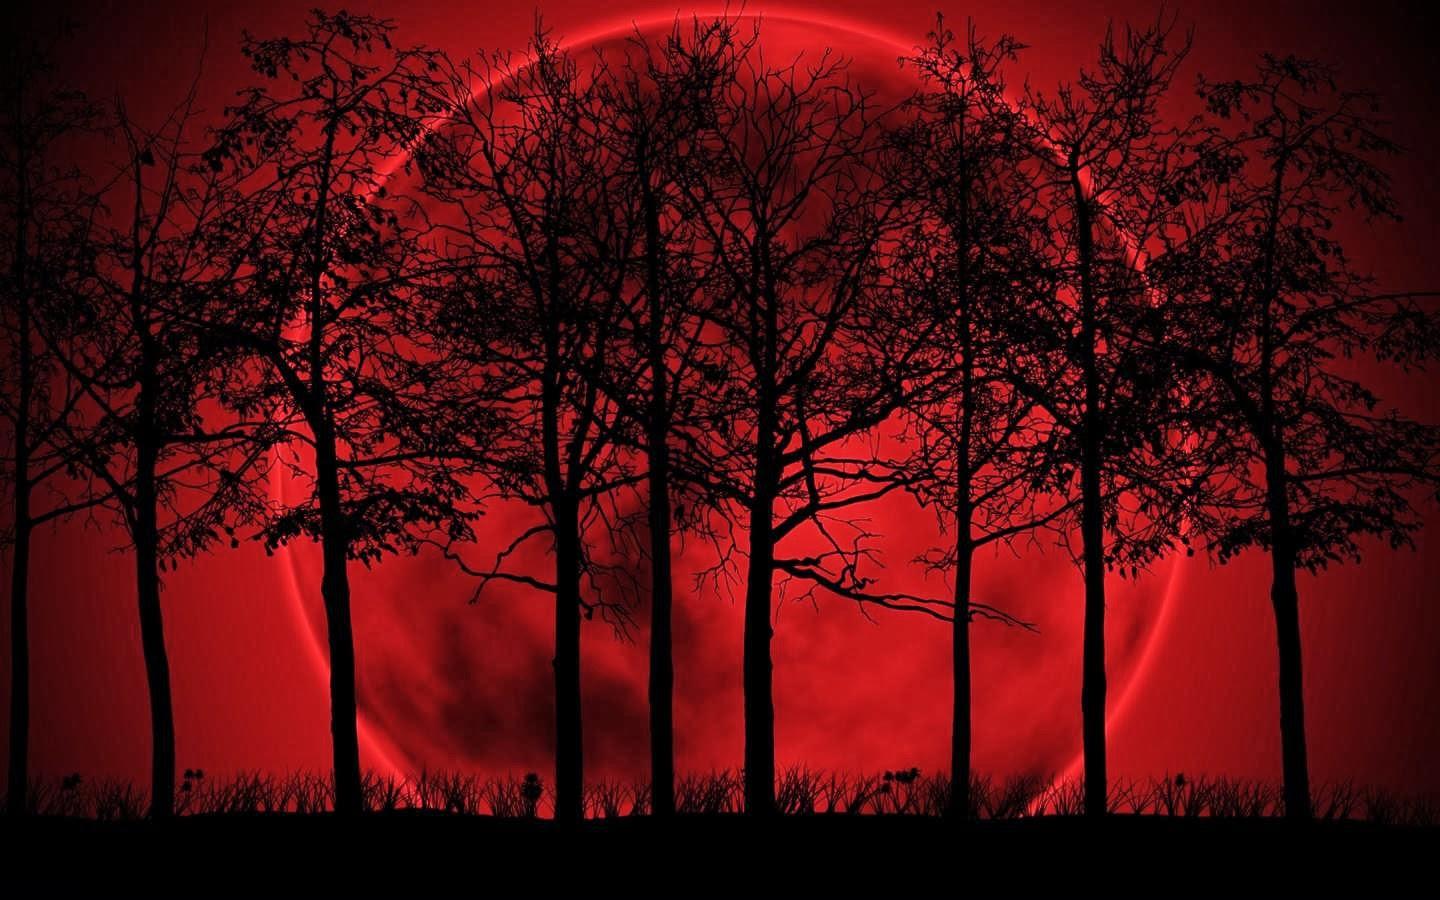 Red Moon wallpaper free download for android smart phones Urpouch